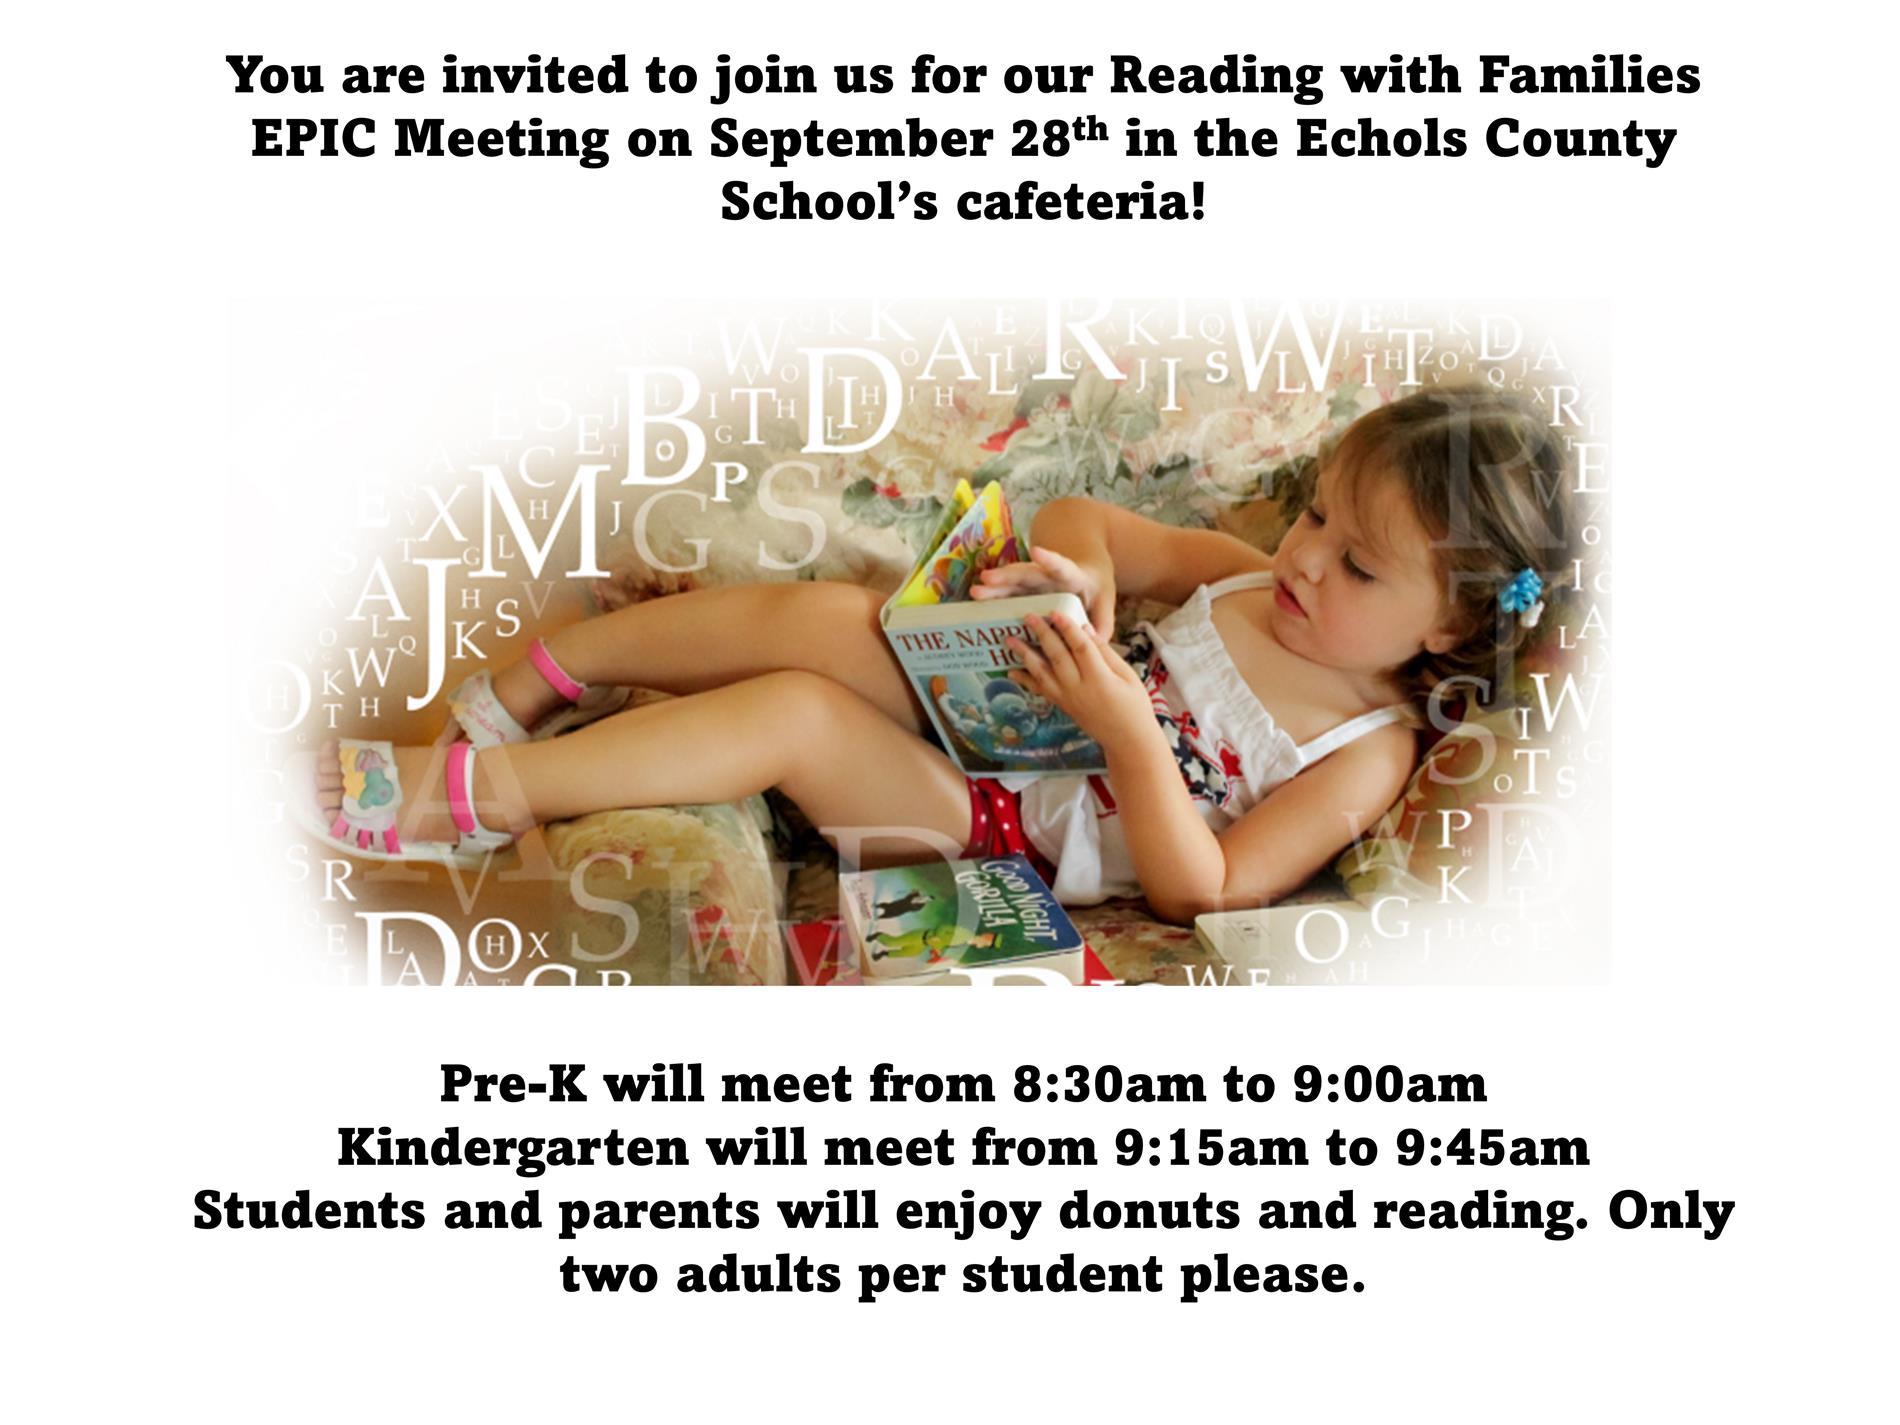 Reading with Families Flyer in English